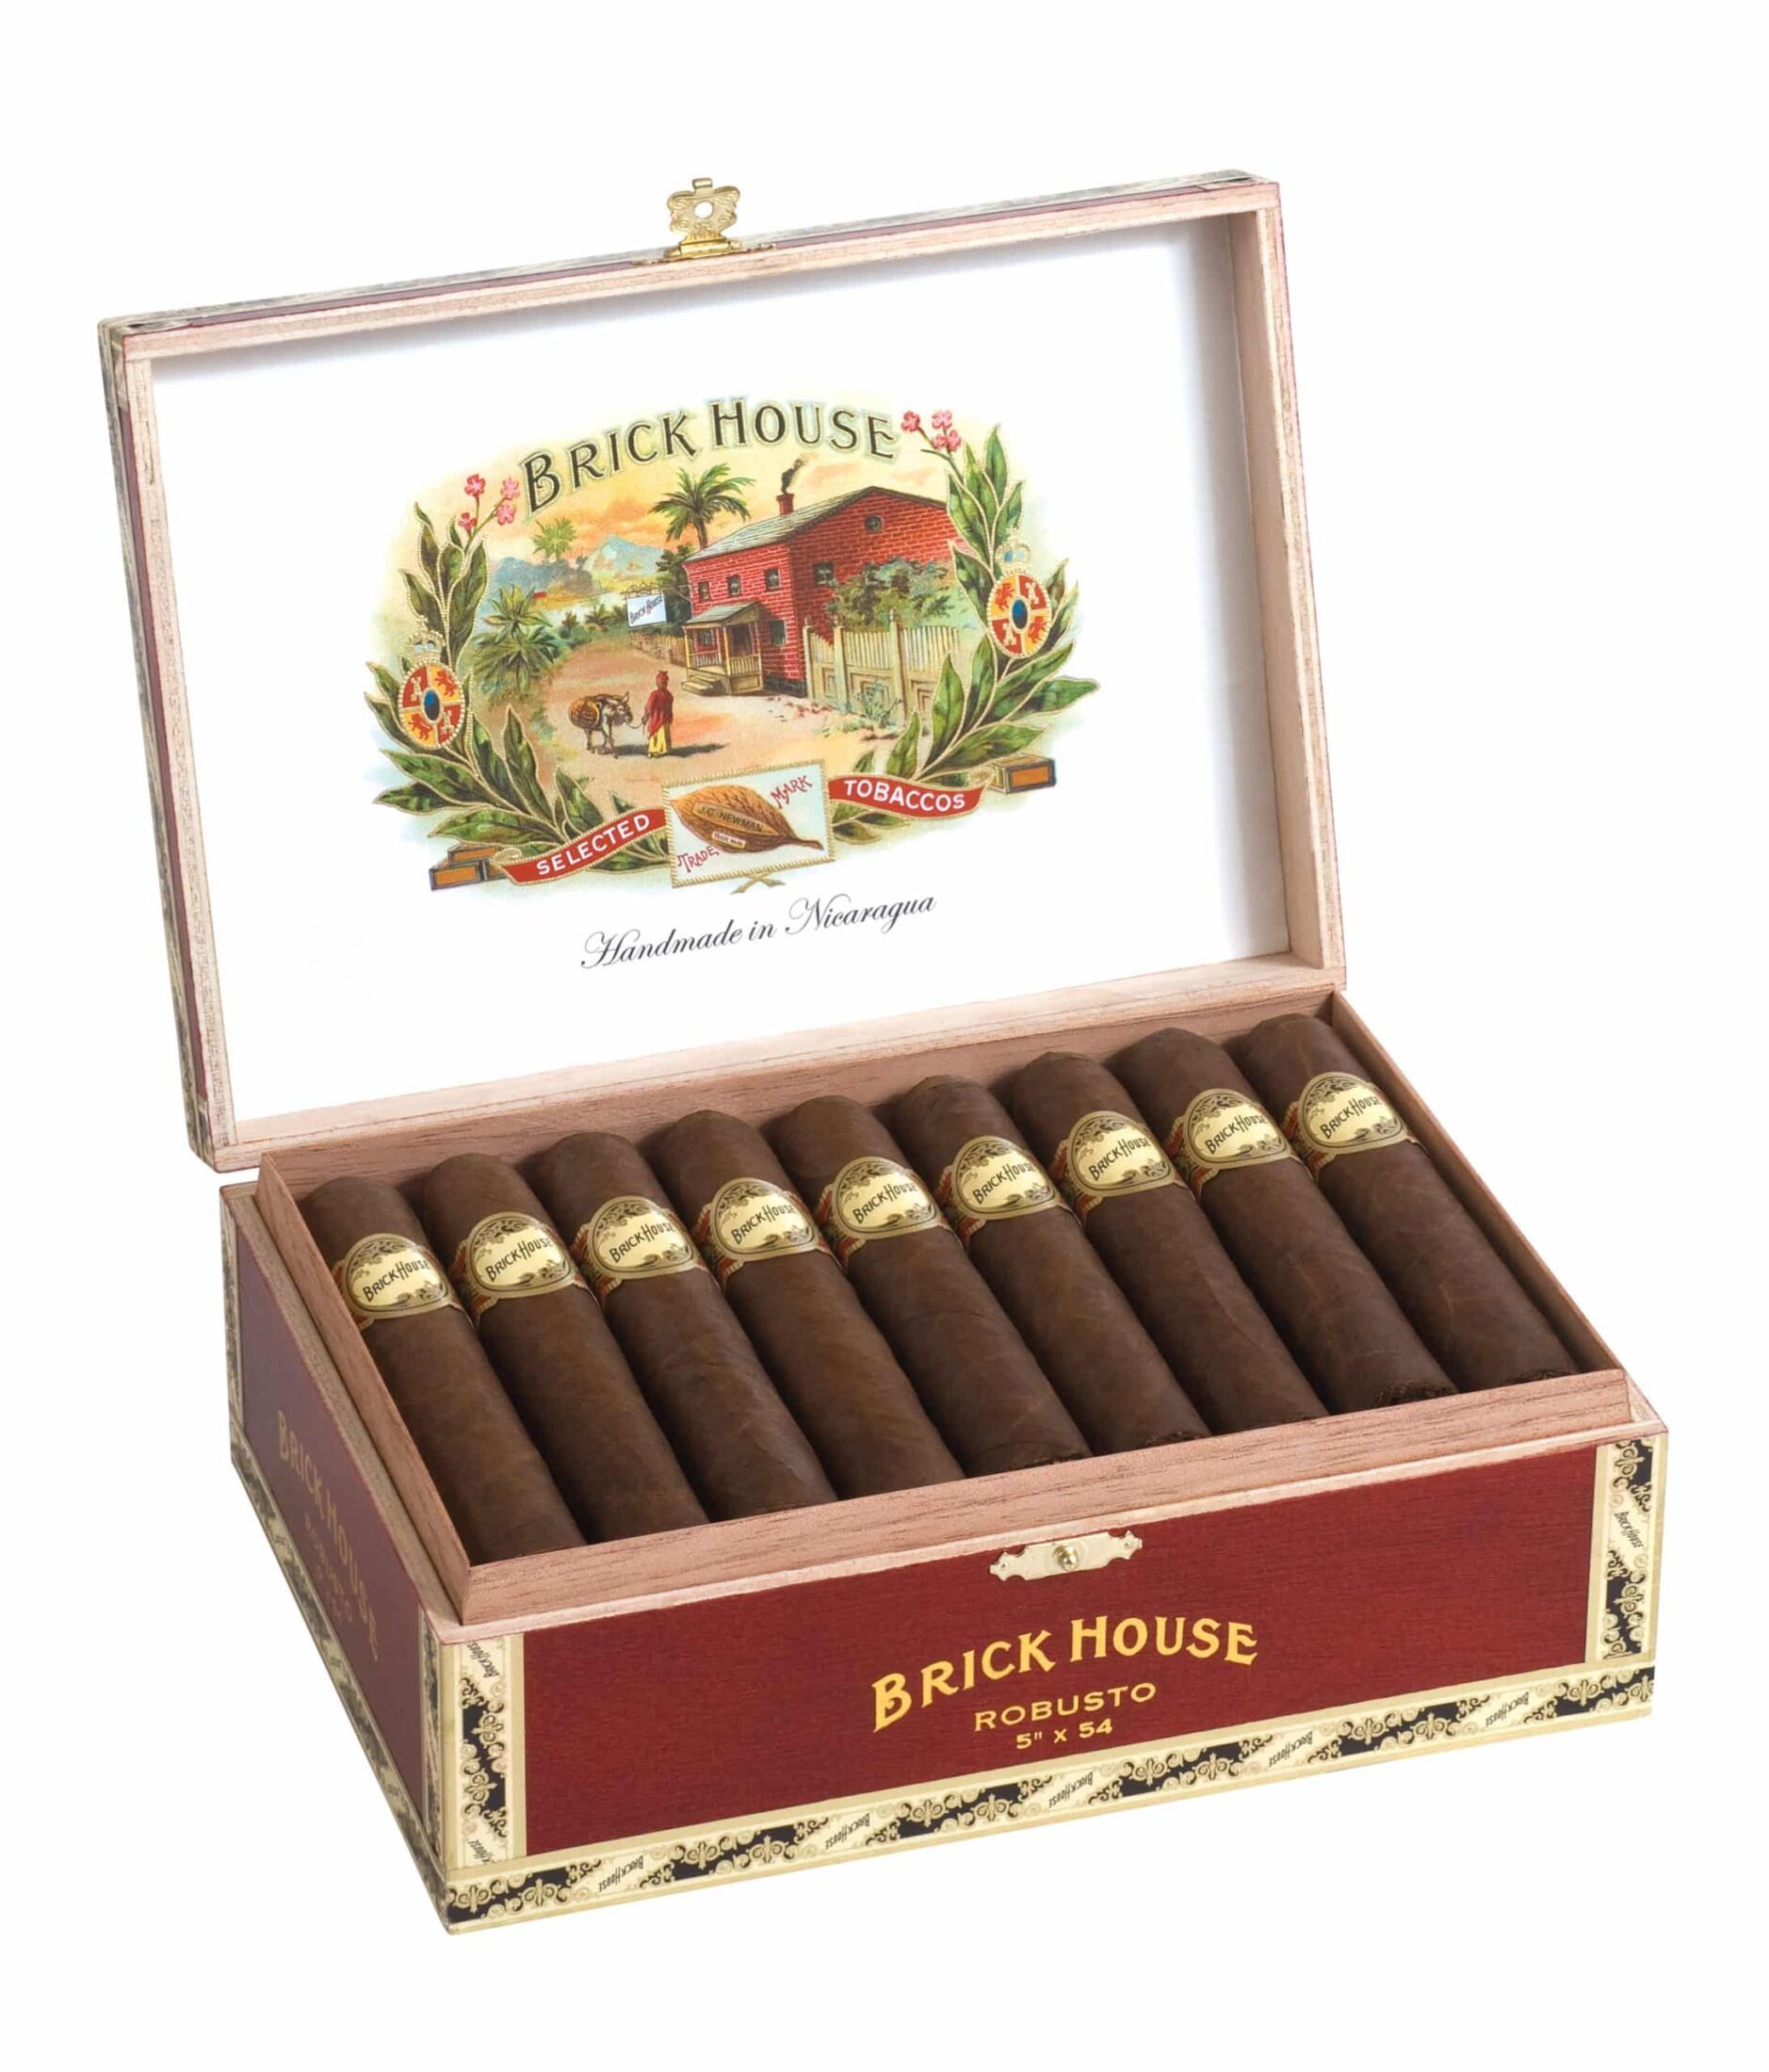 25 count open box brick house robusto cigars